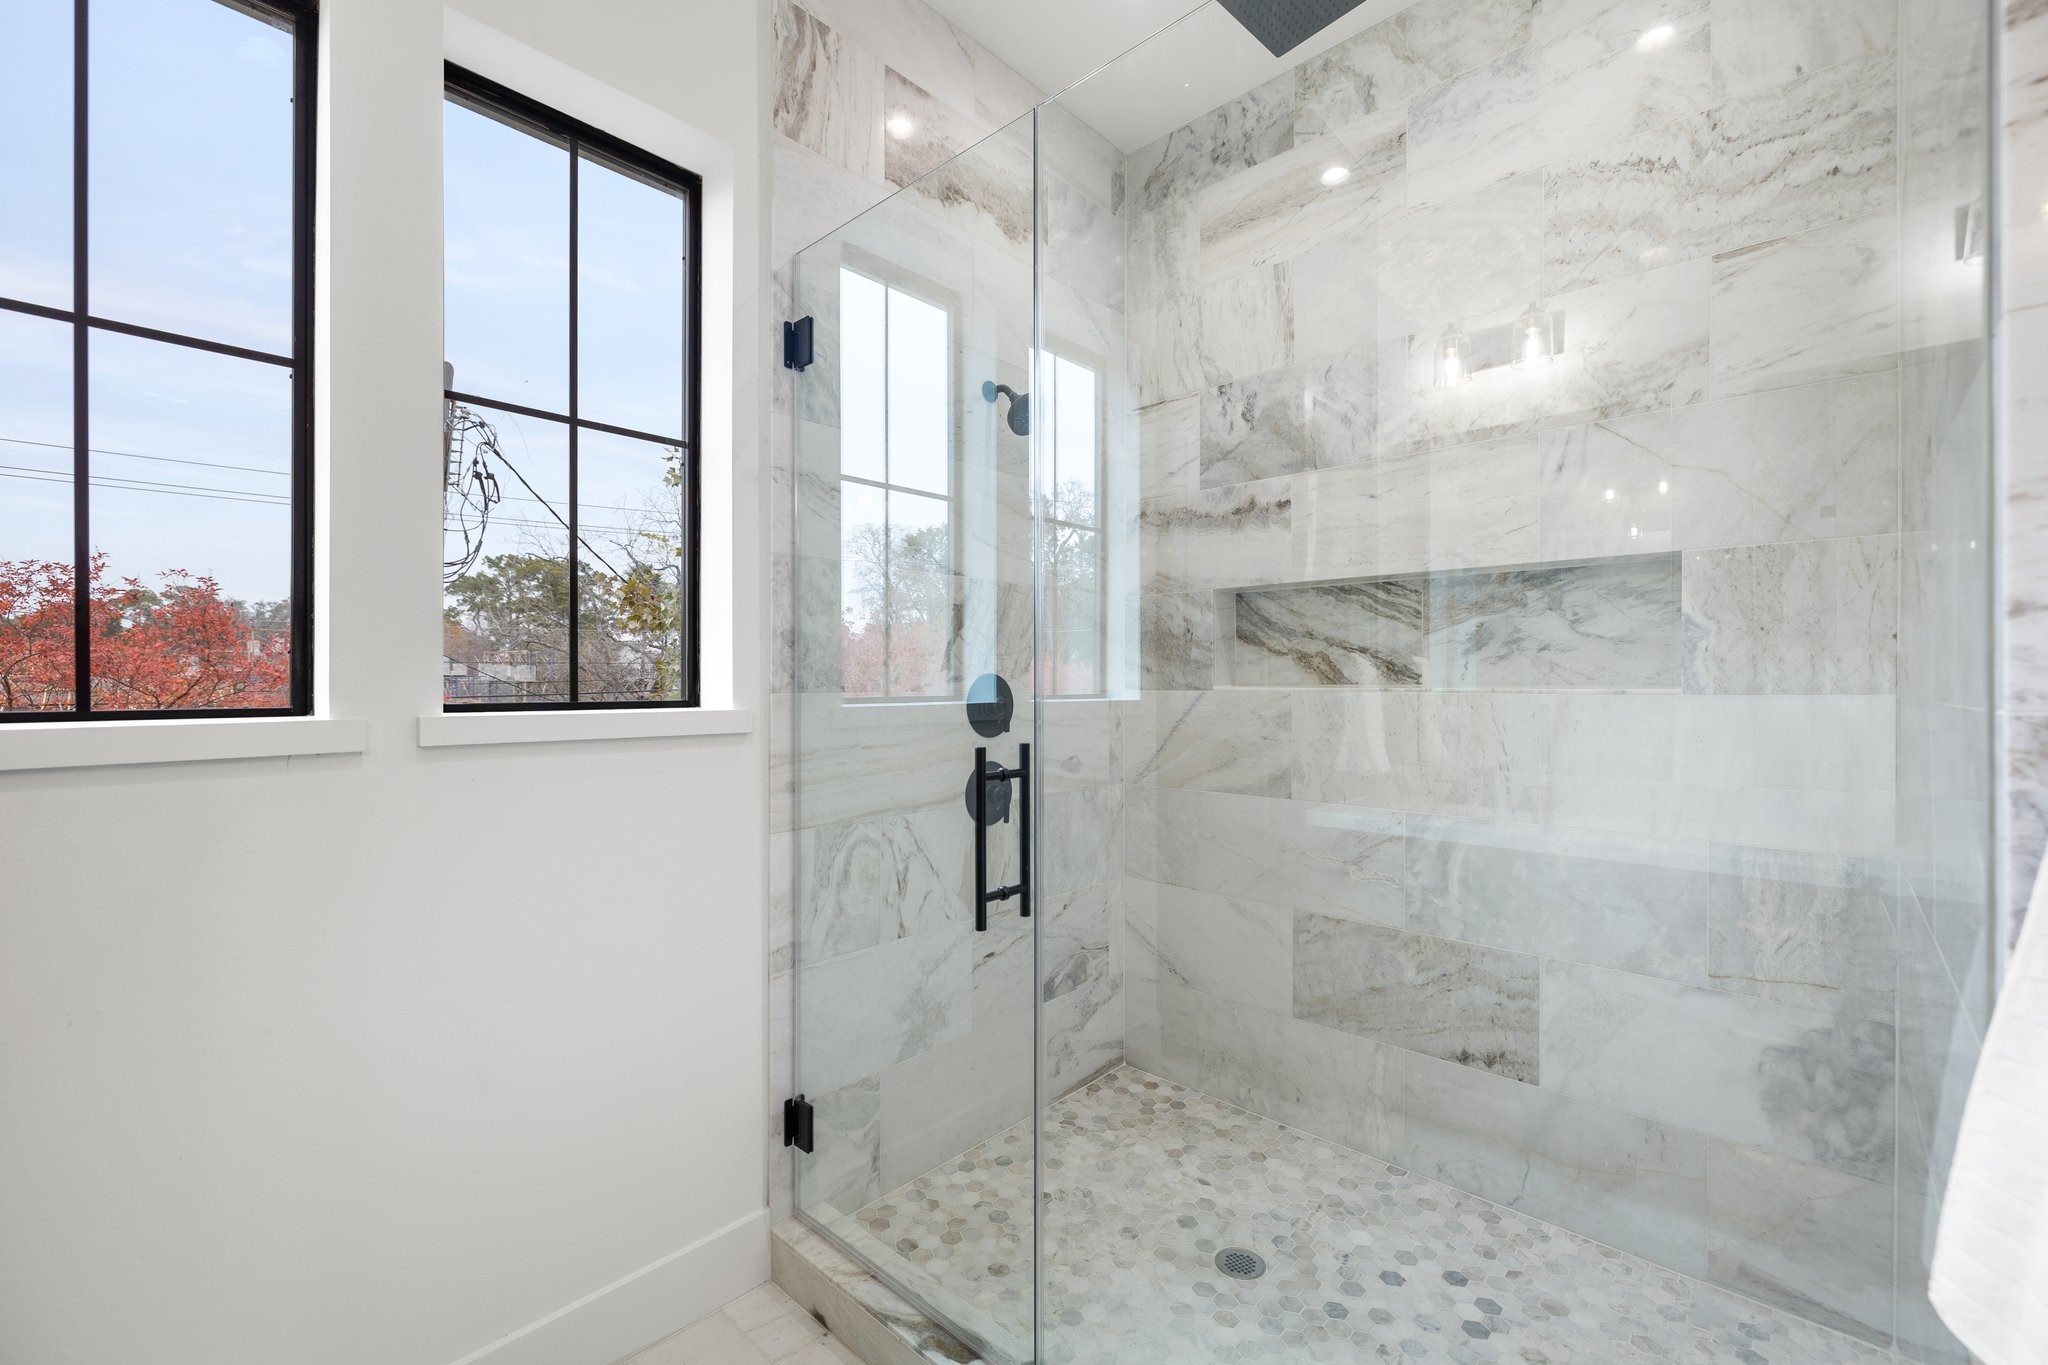 A frameless glass enclosure adorned with sleek black plumbing fixtures. This contemporary touch adds an element of edge and style to your daily routine. An oversized shower niche provides ample space for all your shower essentials.